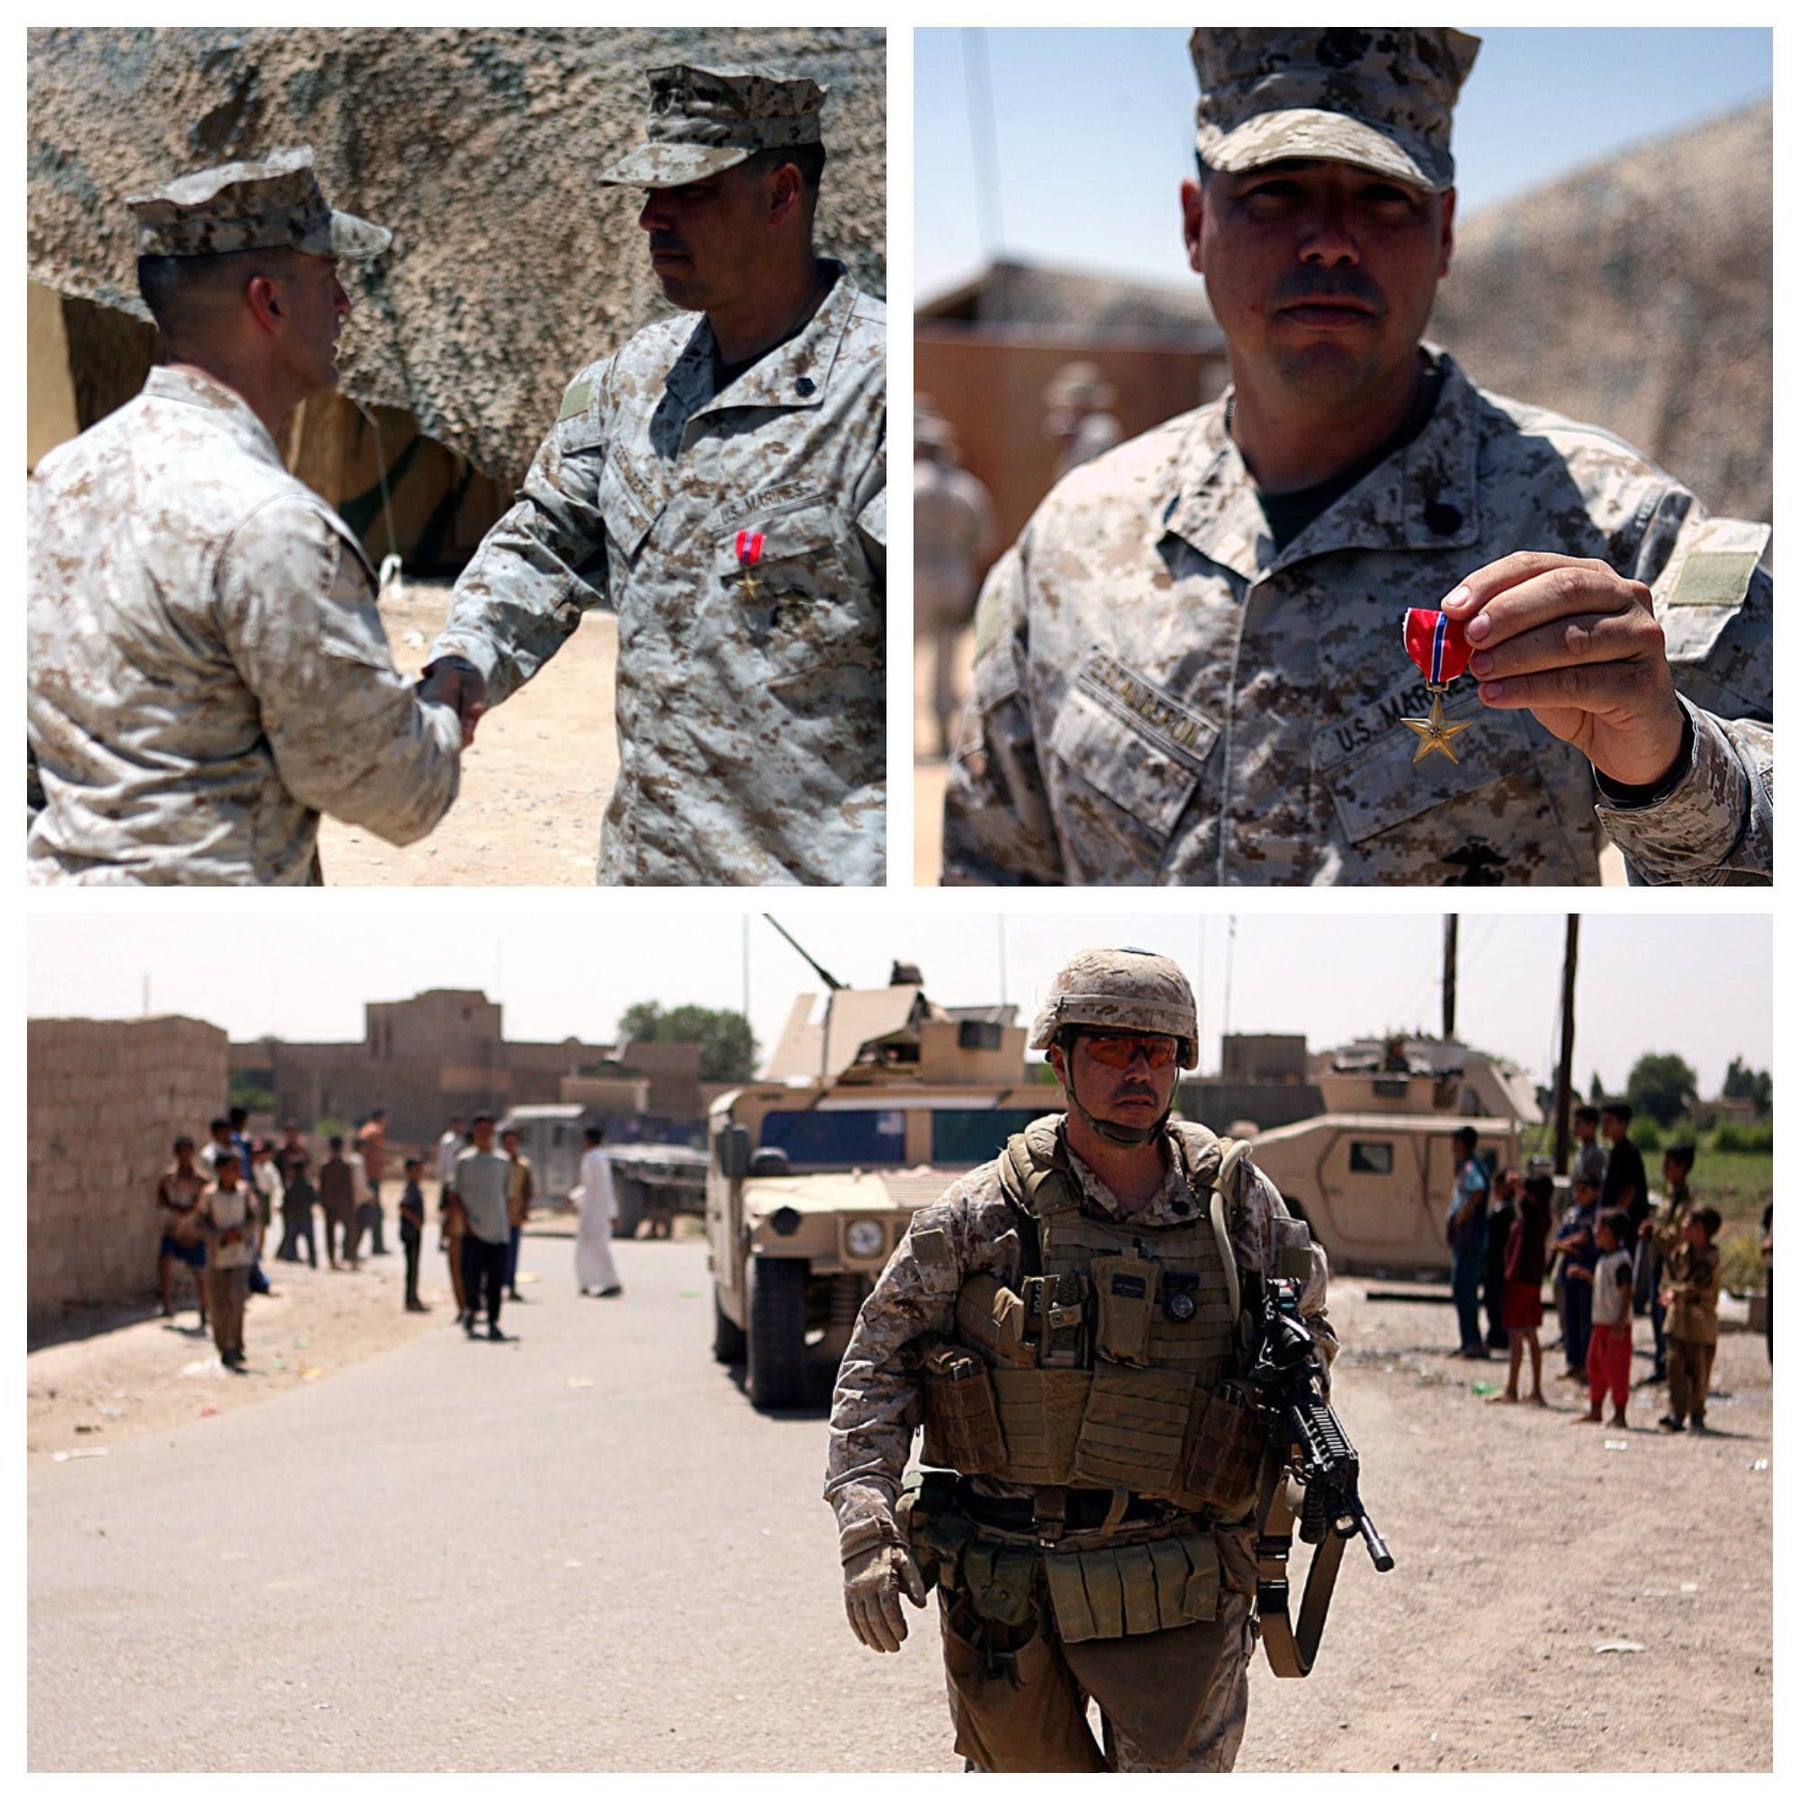 Marine of the Week // "These insurgents just came at us with everything they had that day..."